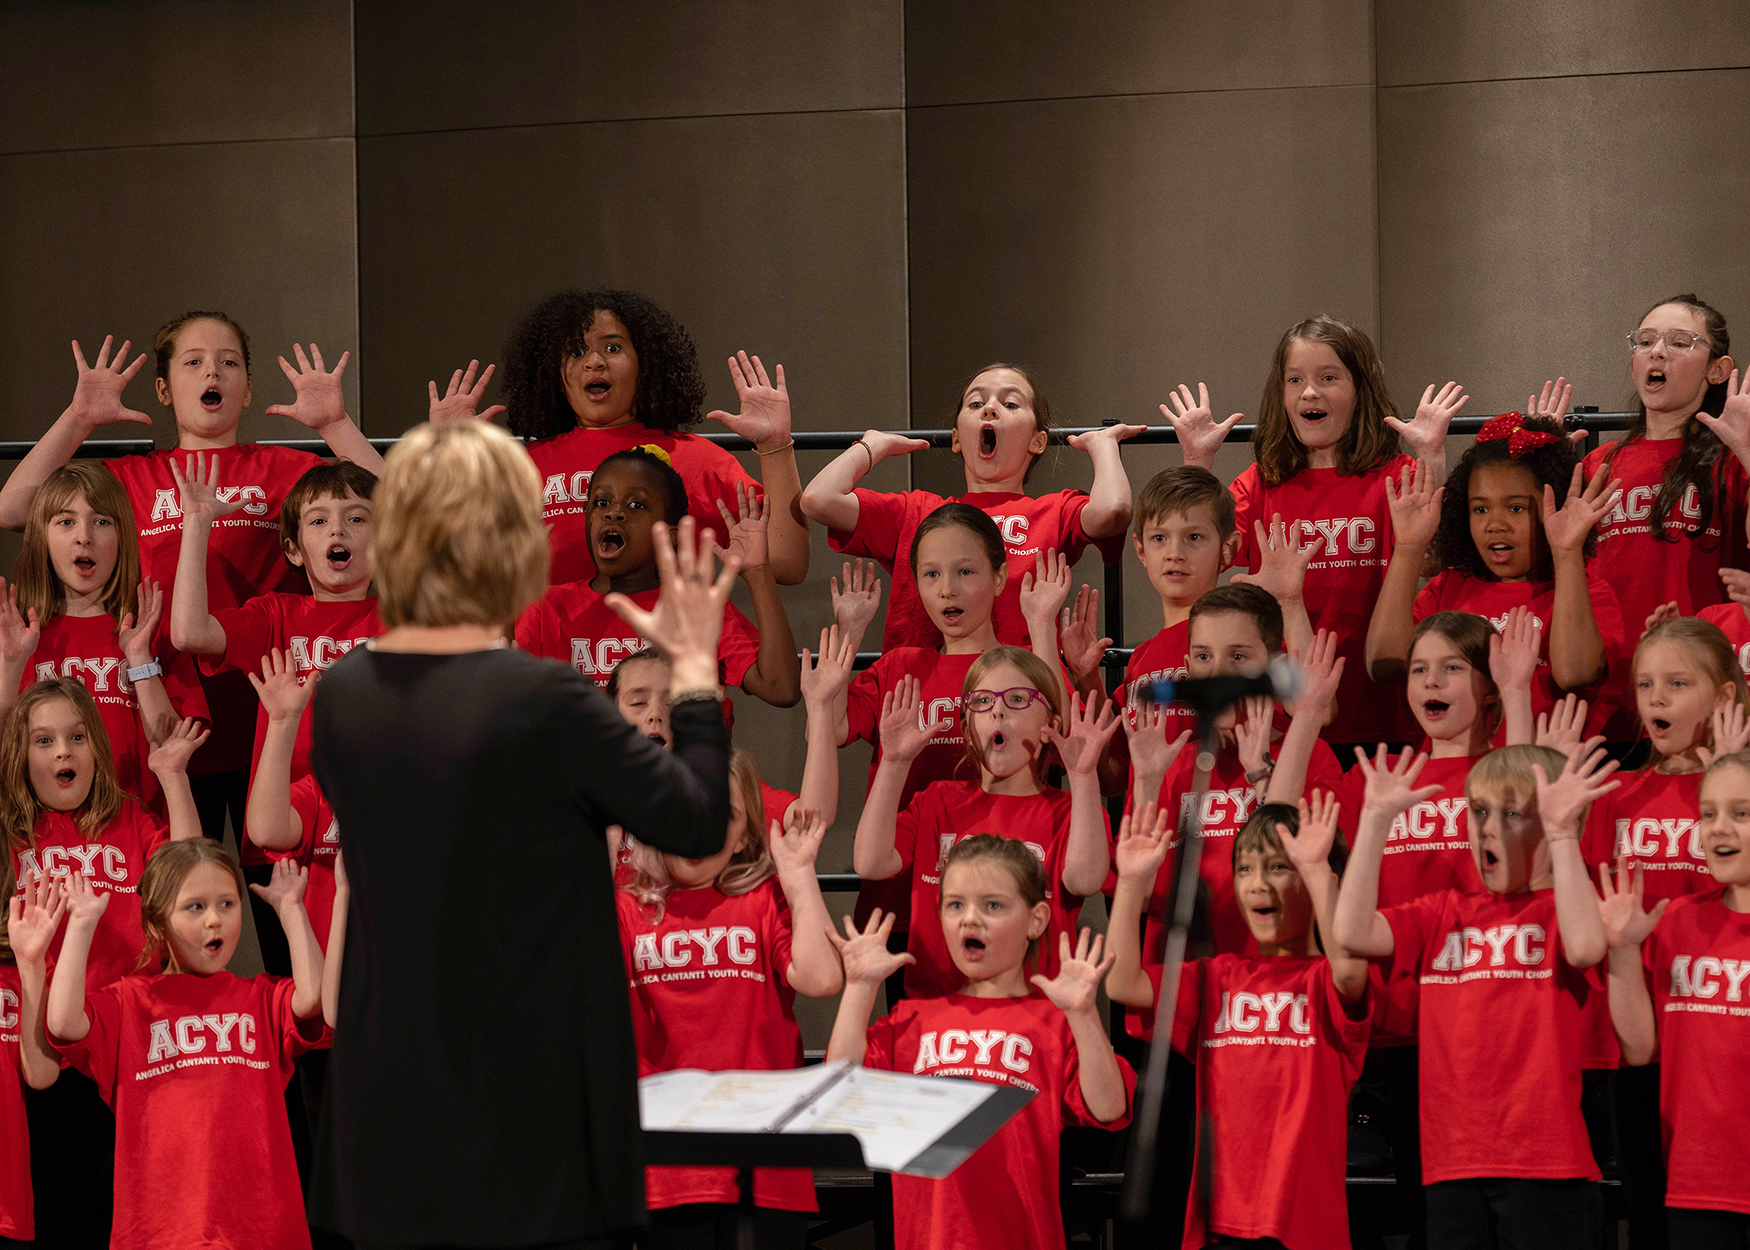 Angelica Cantanti Youth Choirs kids singing in red shirts